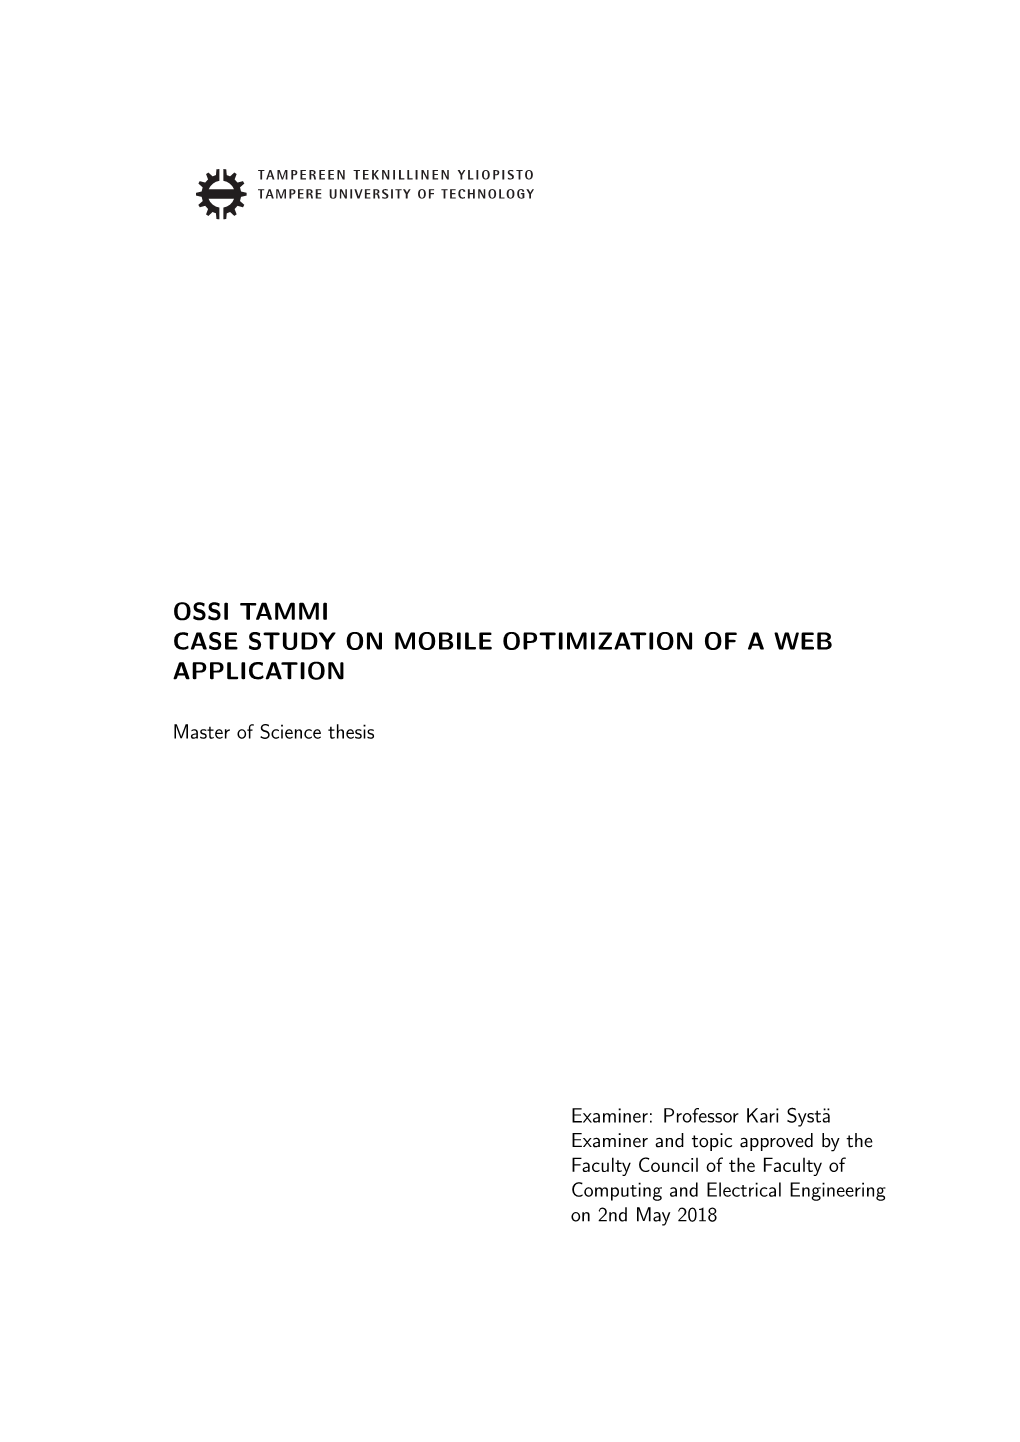 Ossi Tammi Case Study on Mobile Optimization of a Web Application